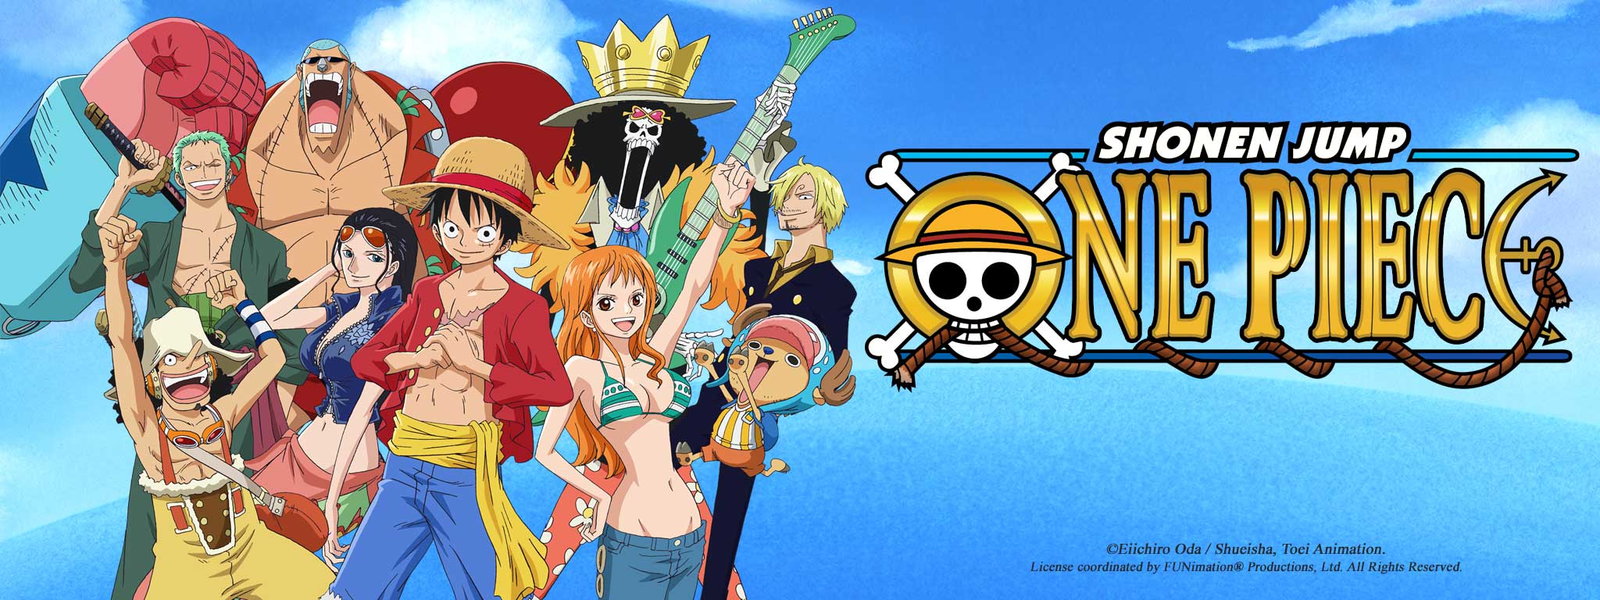 Download one piece sub title indoesia per episode